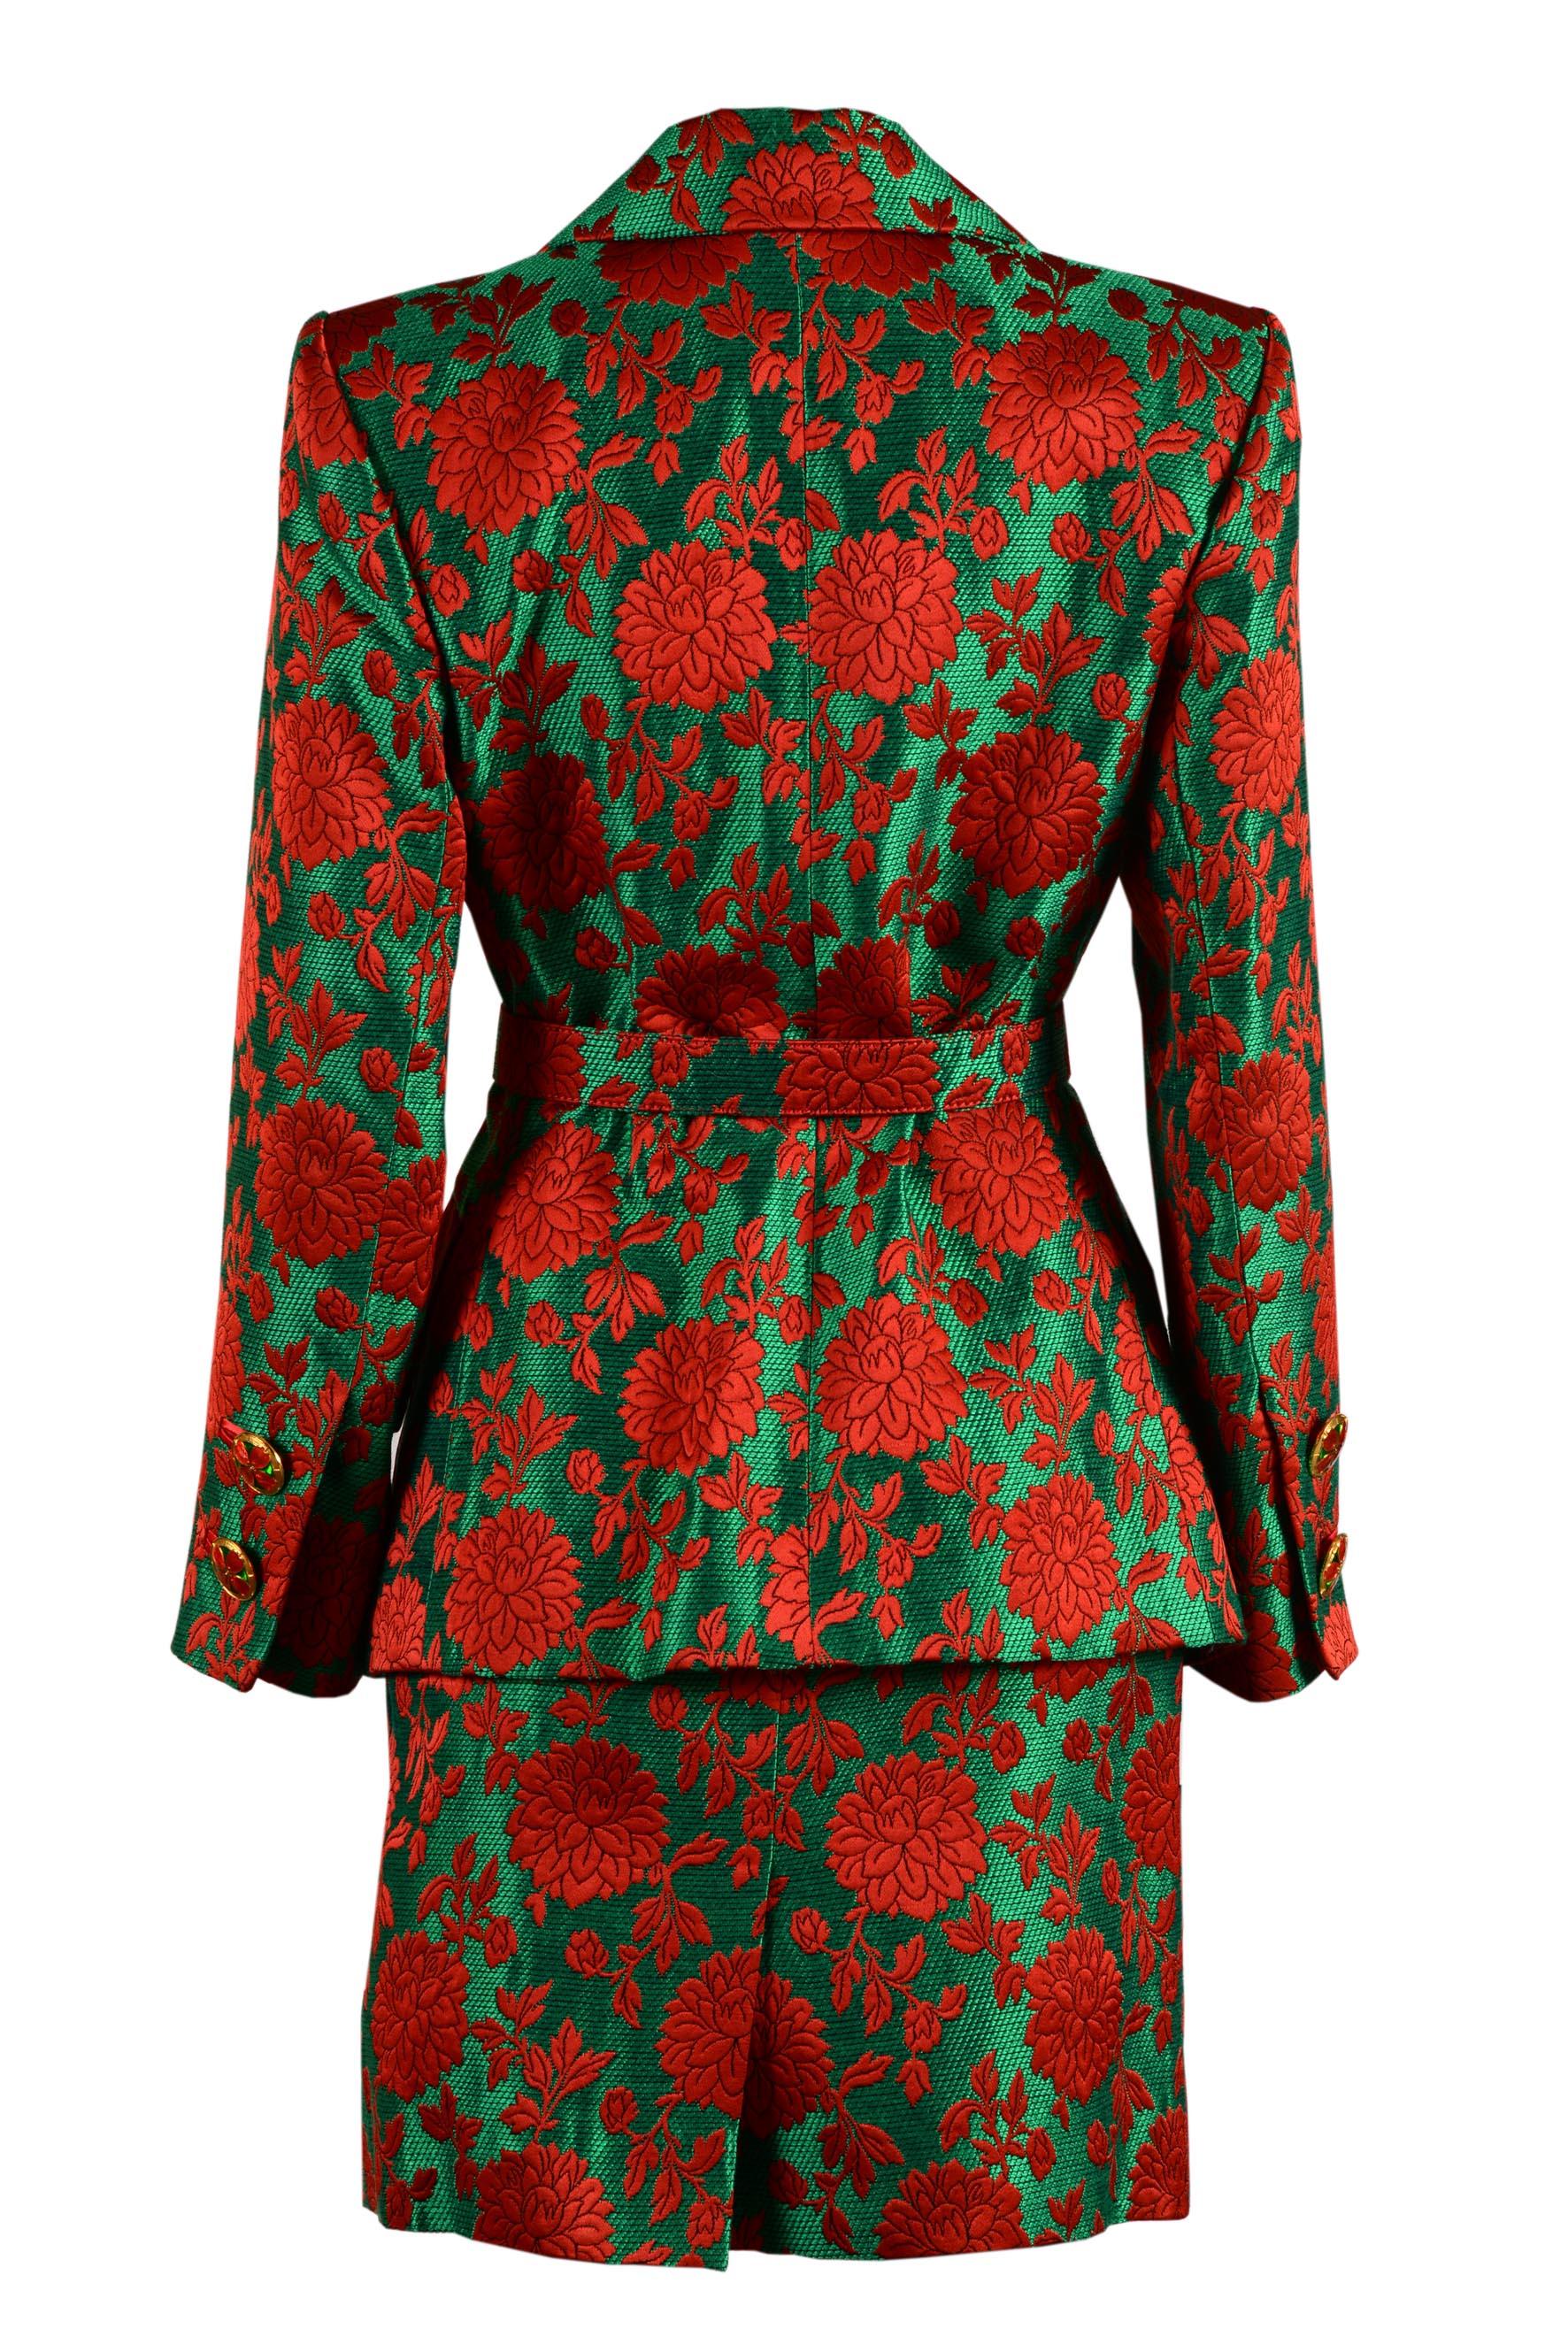 Yves Saint Laurent brocade suit F/W 1992 In Excellent Condition For Sale In Rubiera, RE